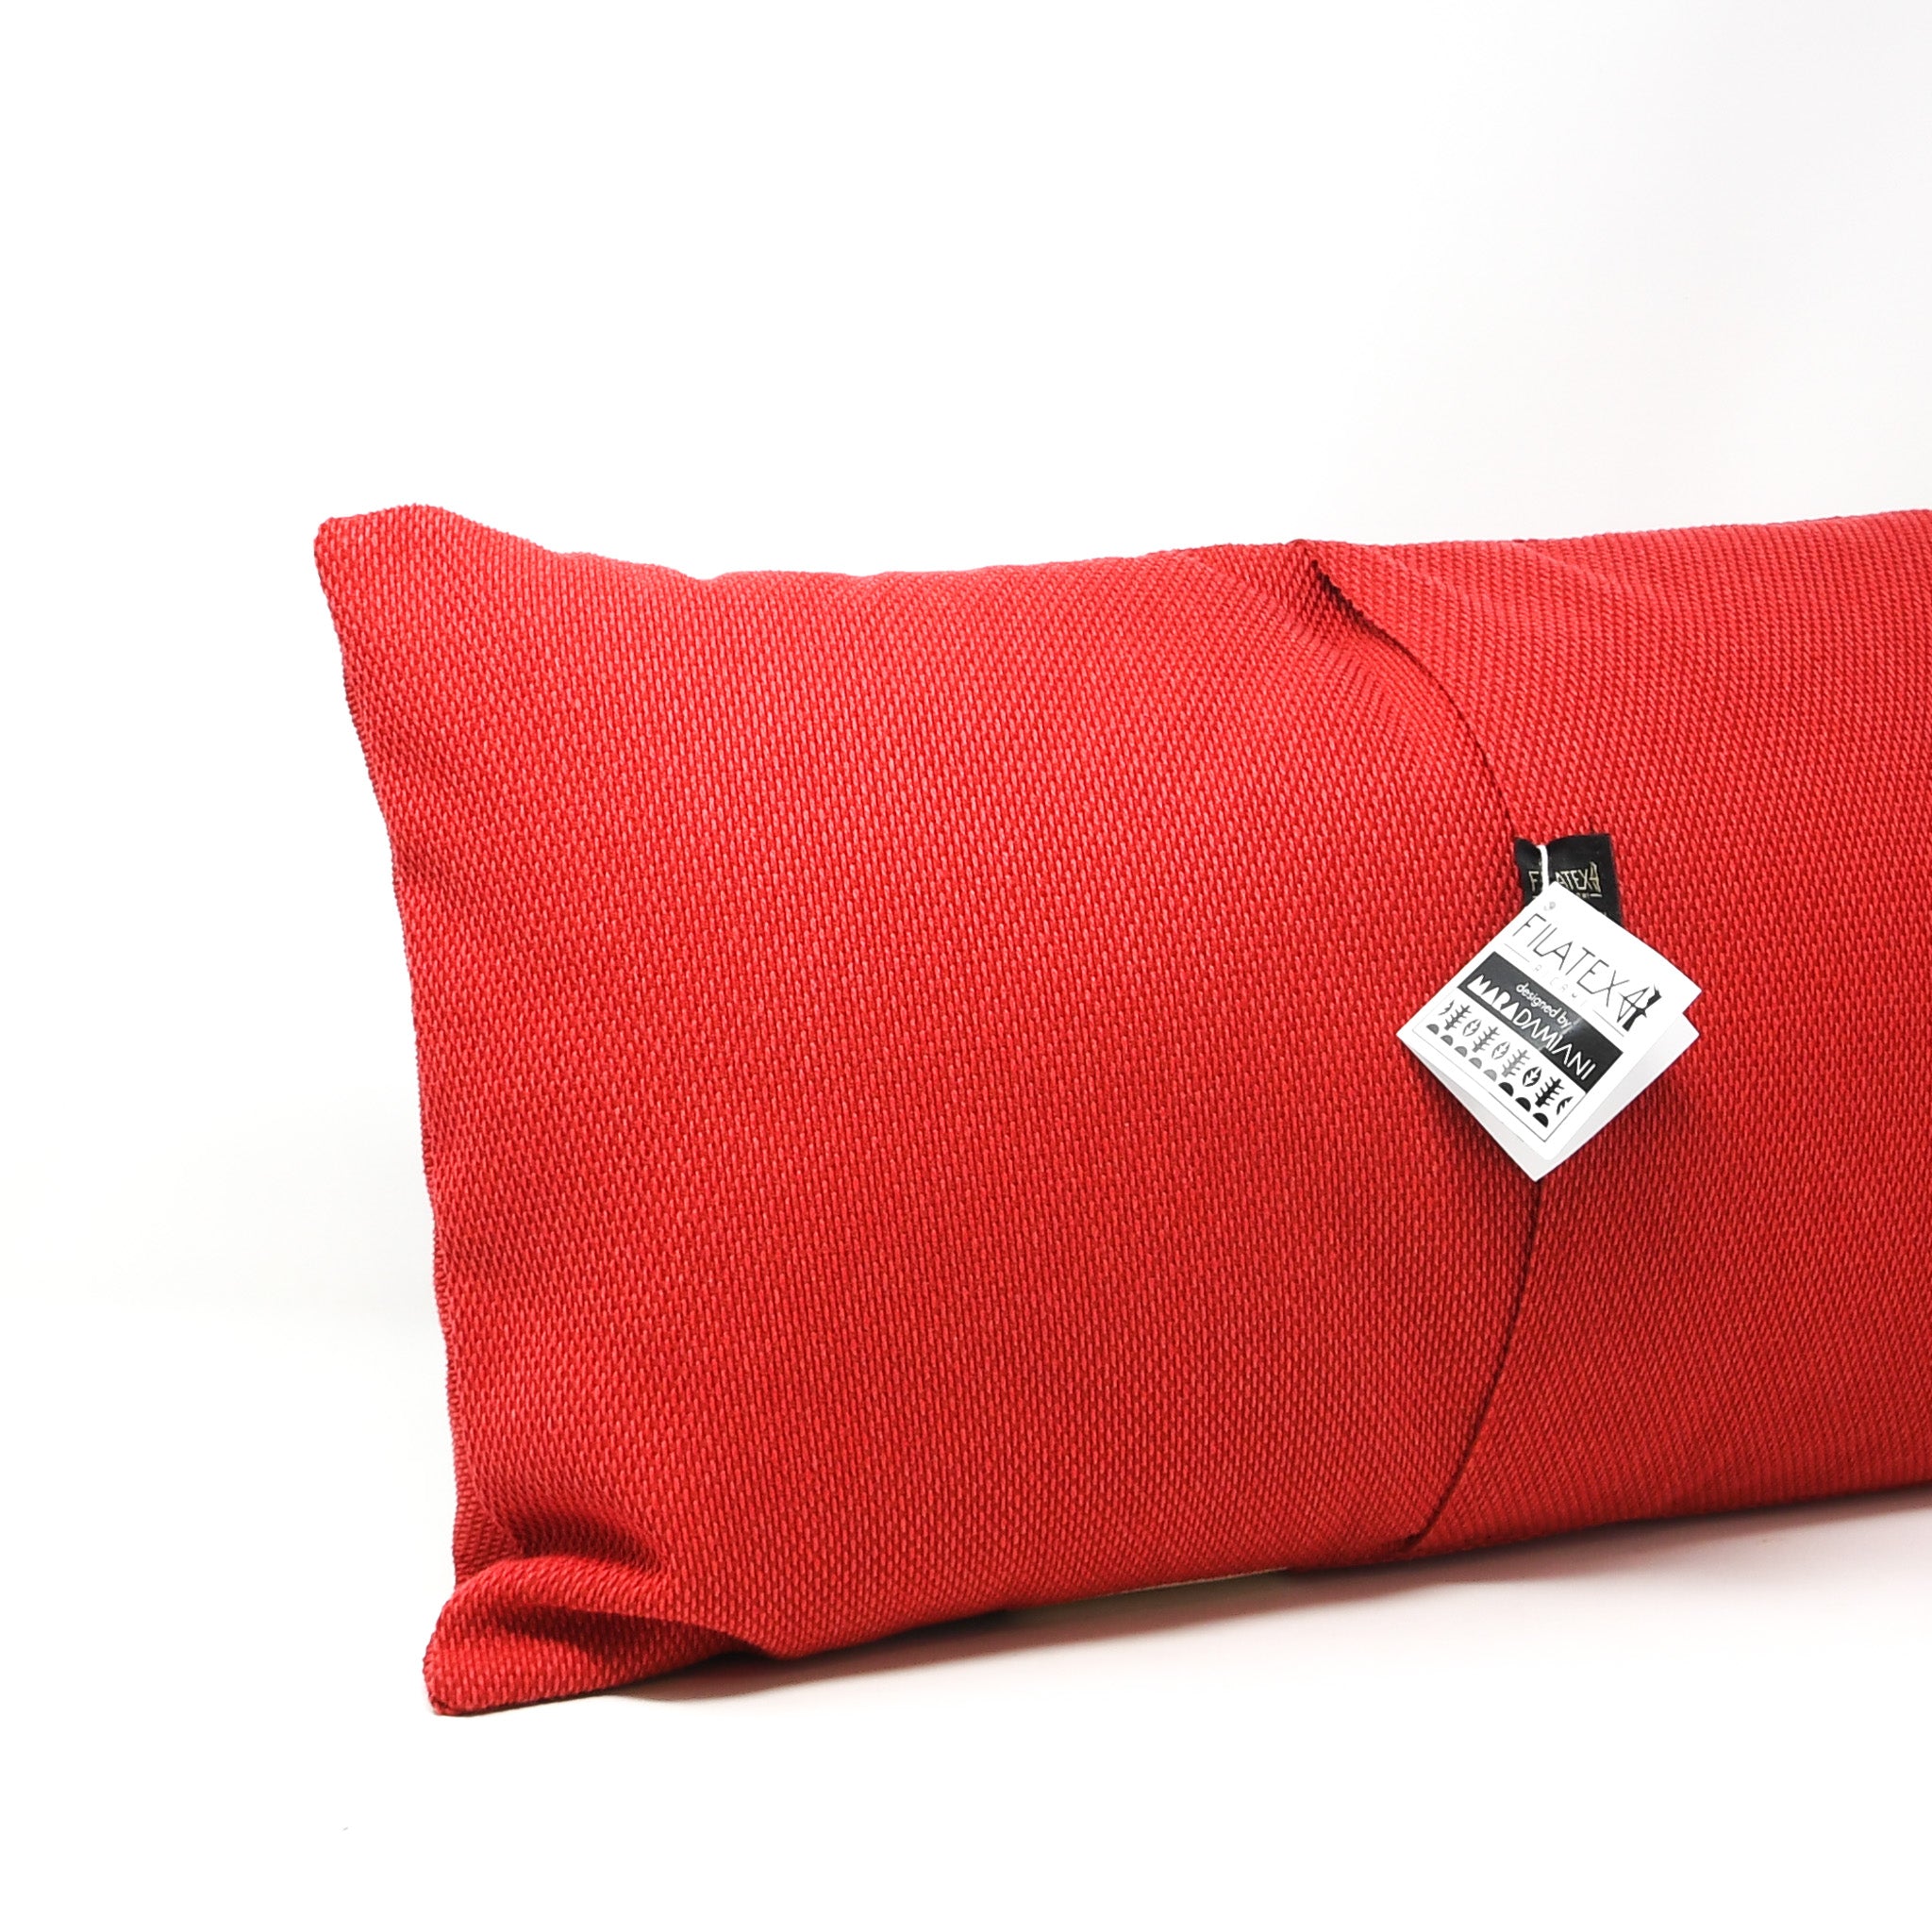 Pillow covers with application